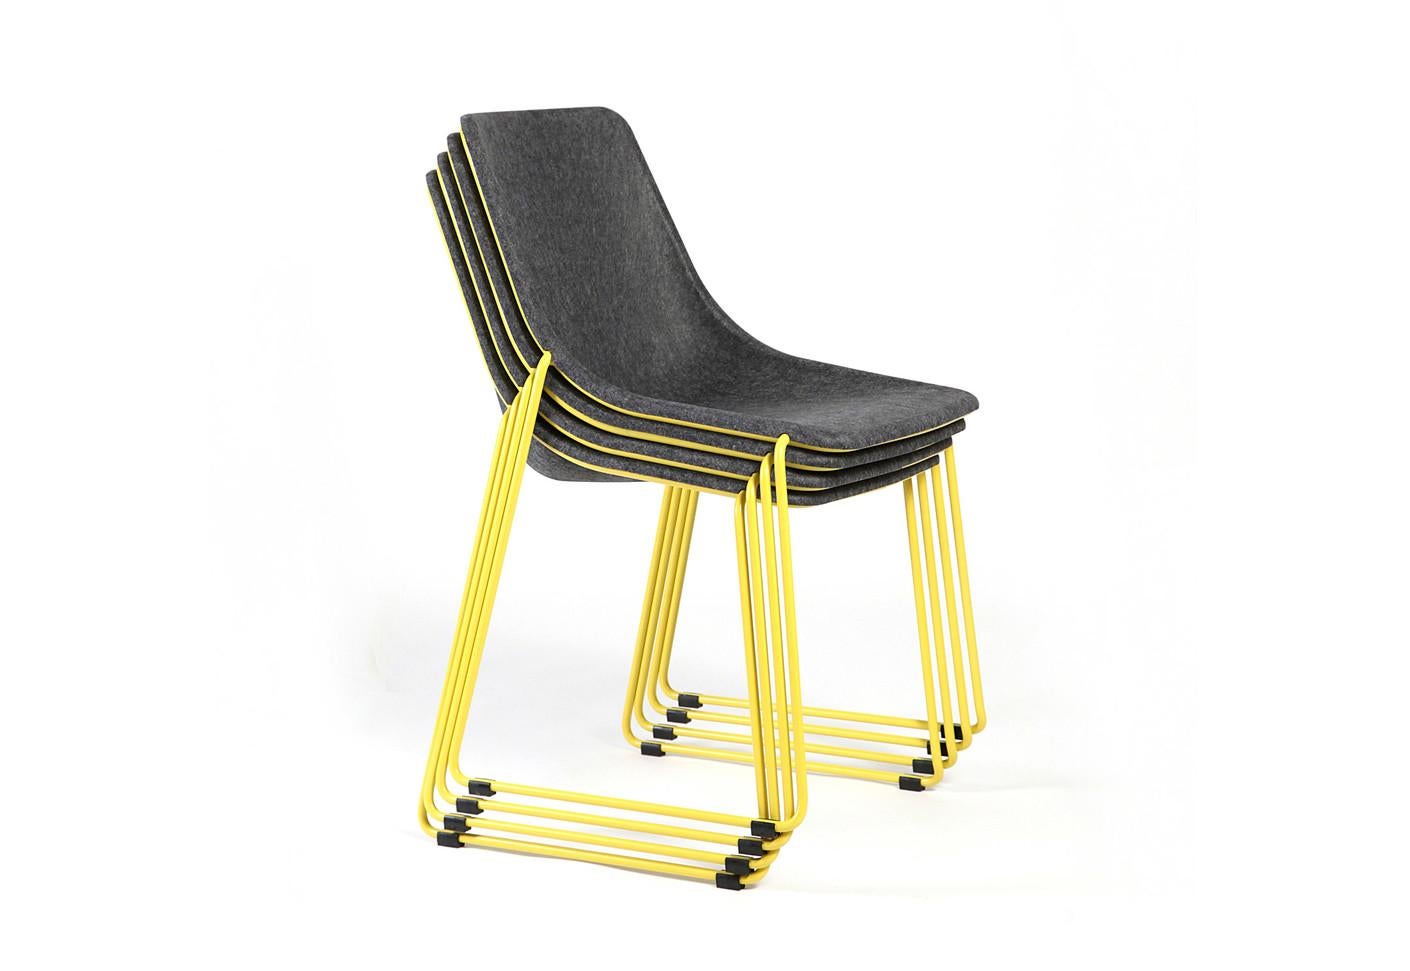 Kola Stack RA is a stacking chair that combines the ingenious Kola felt seat with strong but light weight steel leg frame construction. This combination of materials allows the chair to offer superb comfort, light weight and durability to meeting